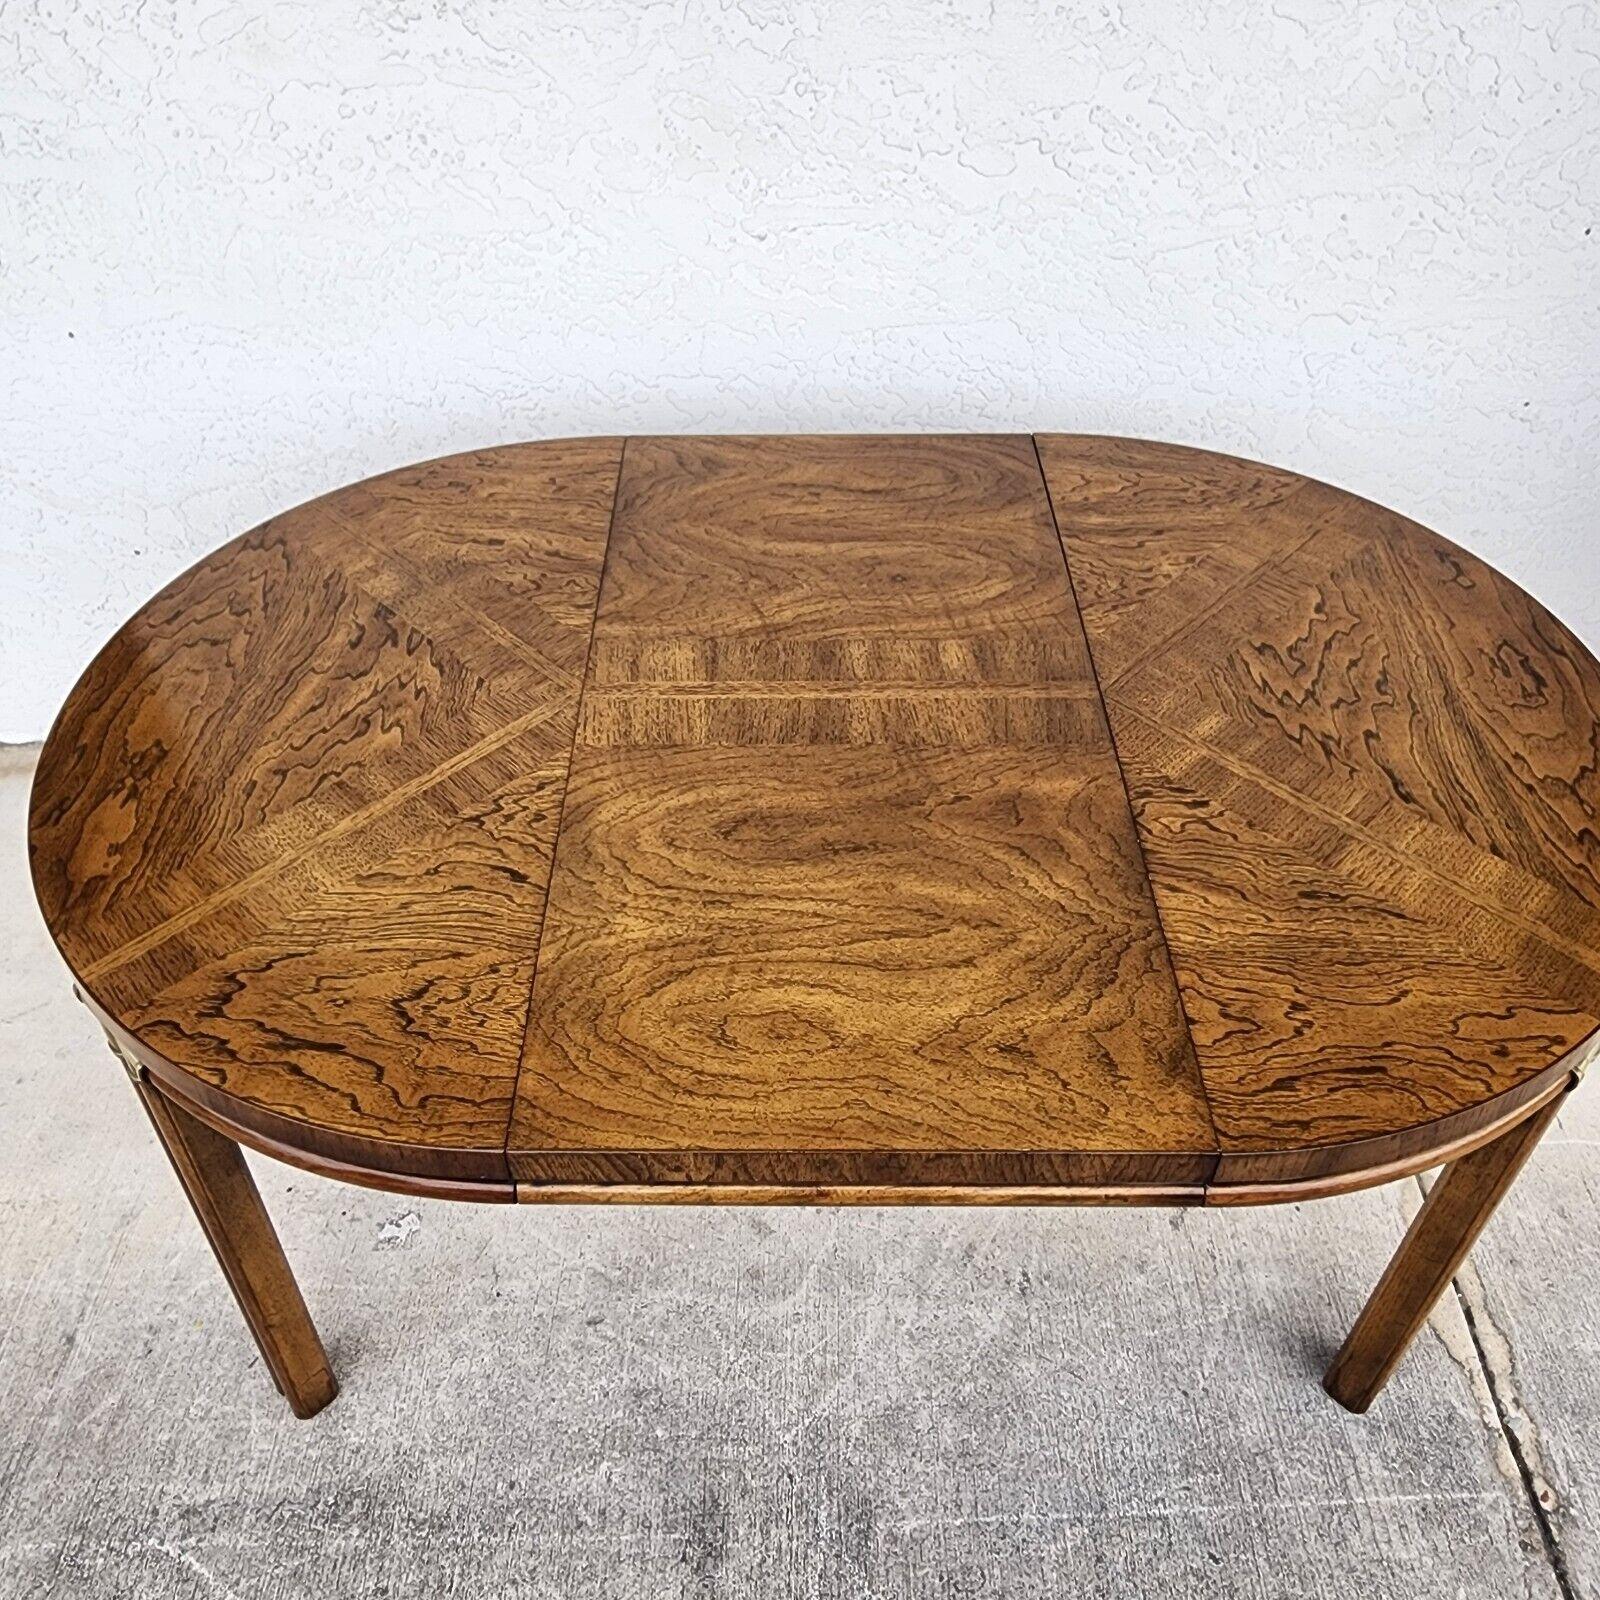 For FULL item description click on CONTINUE READING at the bottom of this page.

Offering One Of Our Recent Palm Beach Estate Fine Furniture Acquisitions Of A
Vintage Drexel Accolade Dining Table with Extension

We also have the 6 matching dining